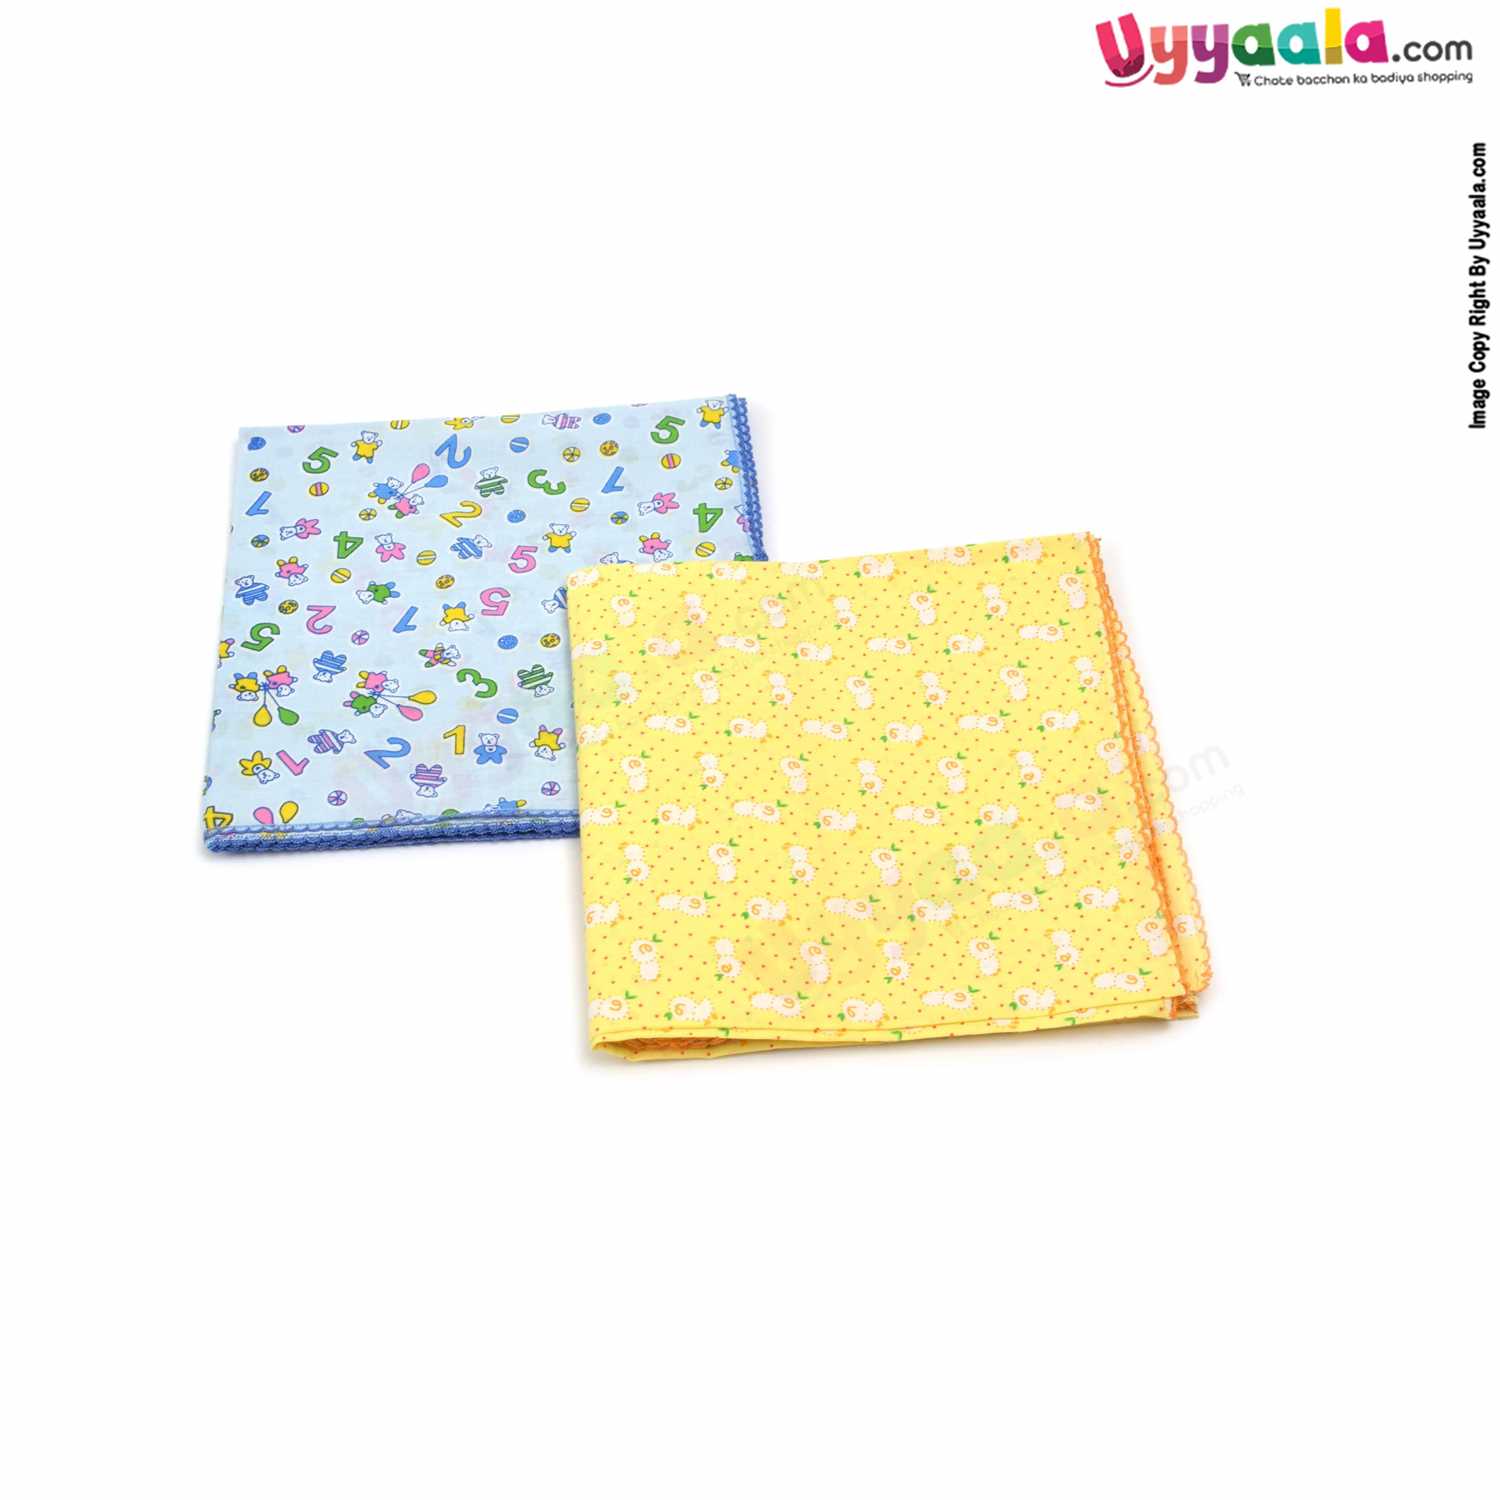 SNUG UP Babies Cotton Wrapper with Teddy Bear & Numbers Print Pack of 2 0+m Age, Size (109*99cm)-Yellow & Blue